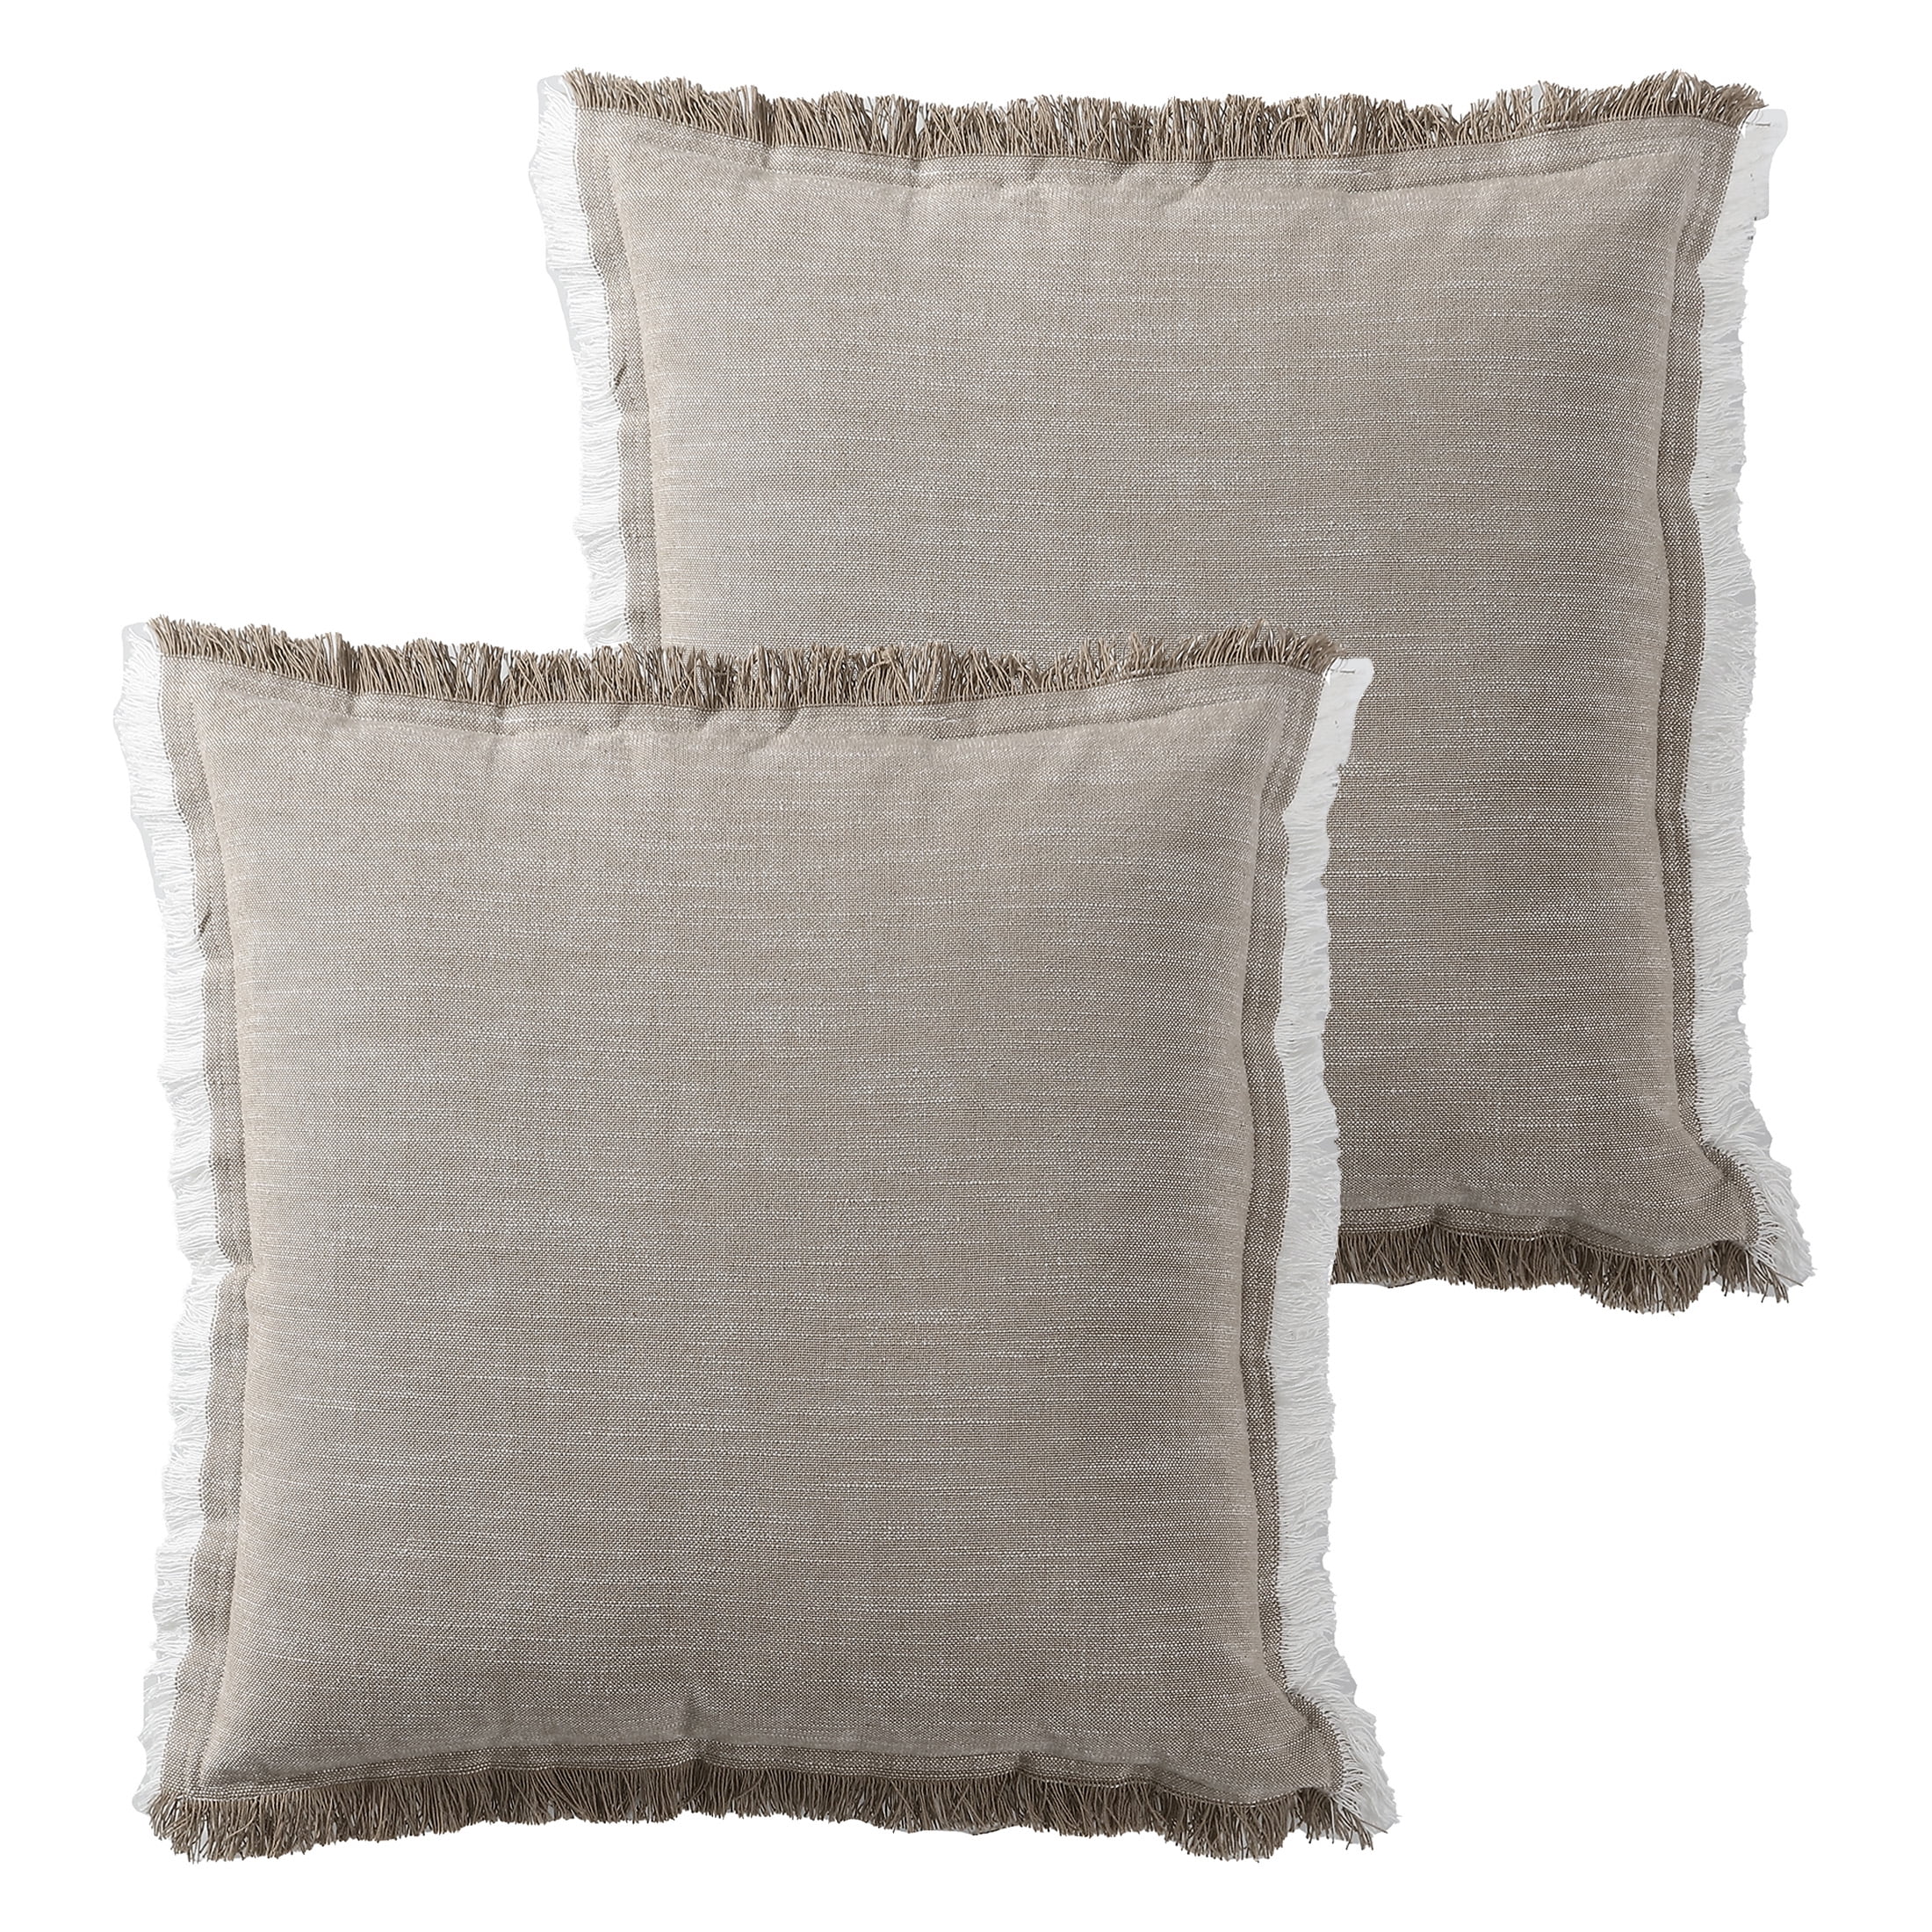 18 x 18 Square Cotton Accent Throw Pillow, Fluffy Fringes, Soft